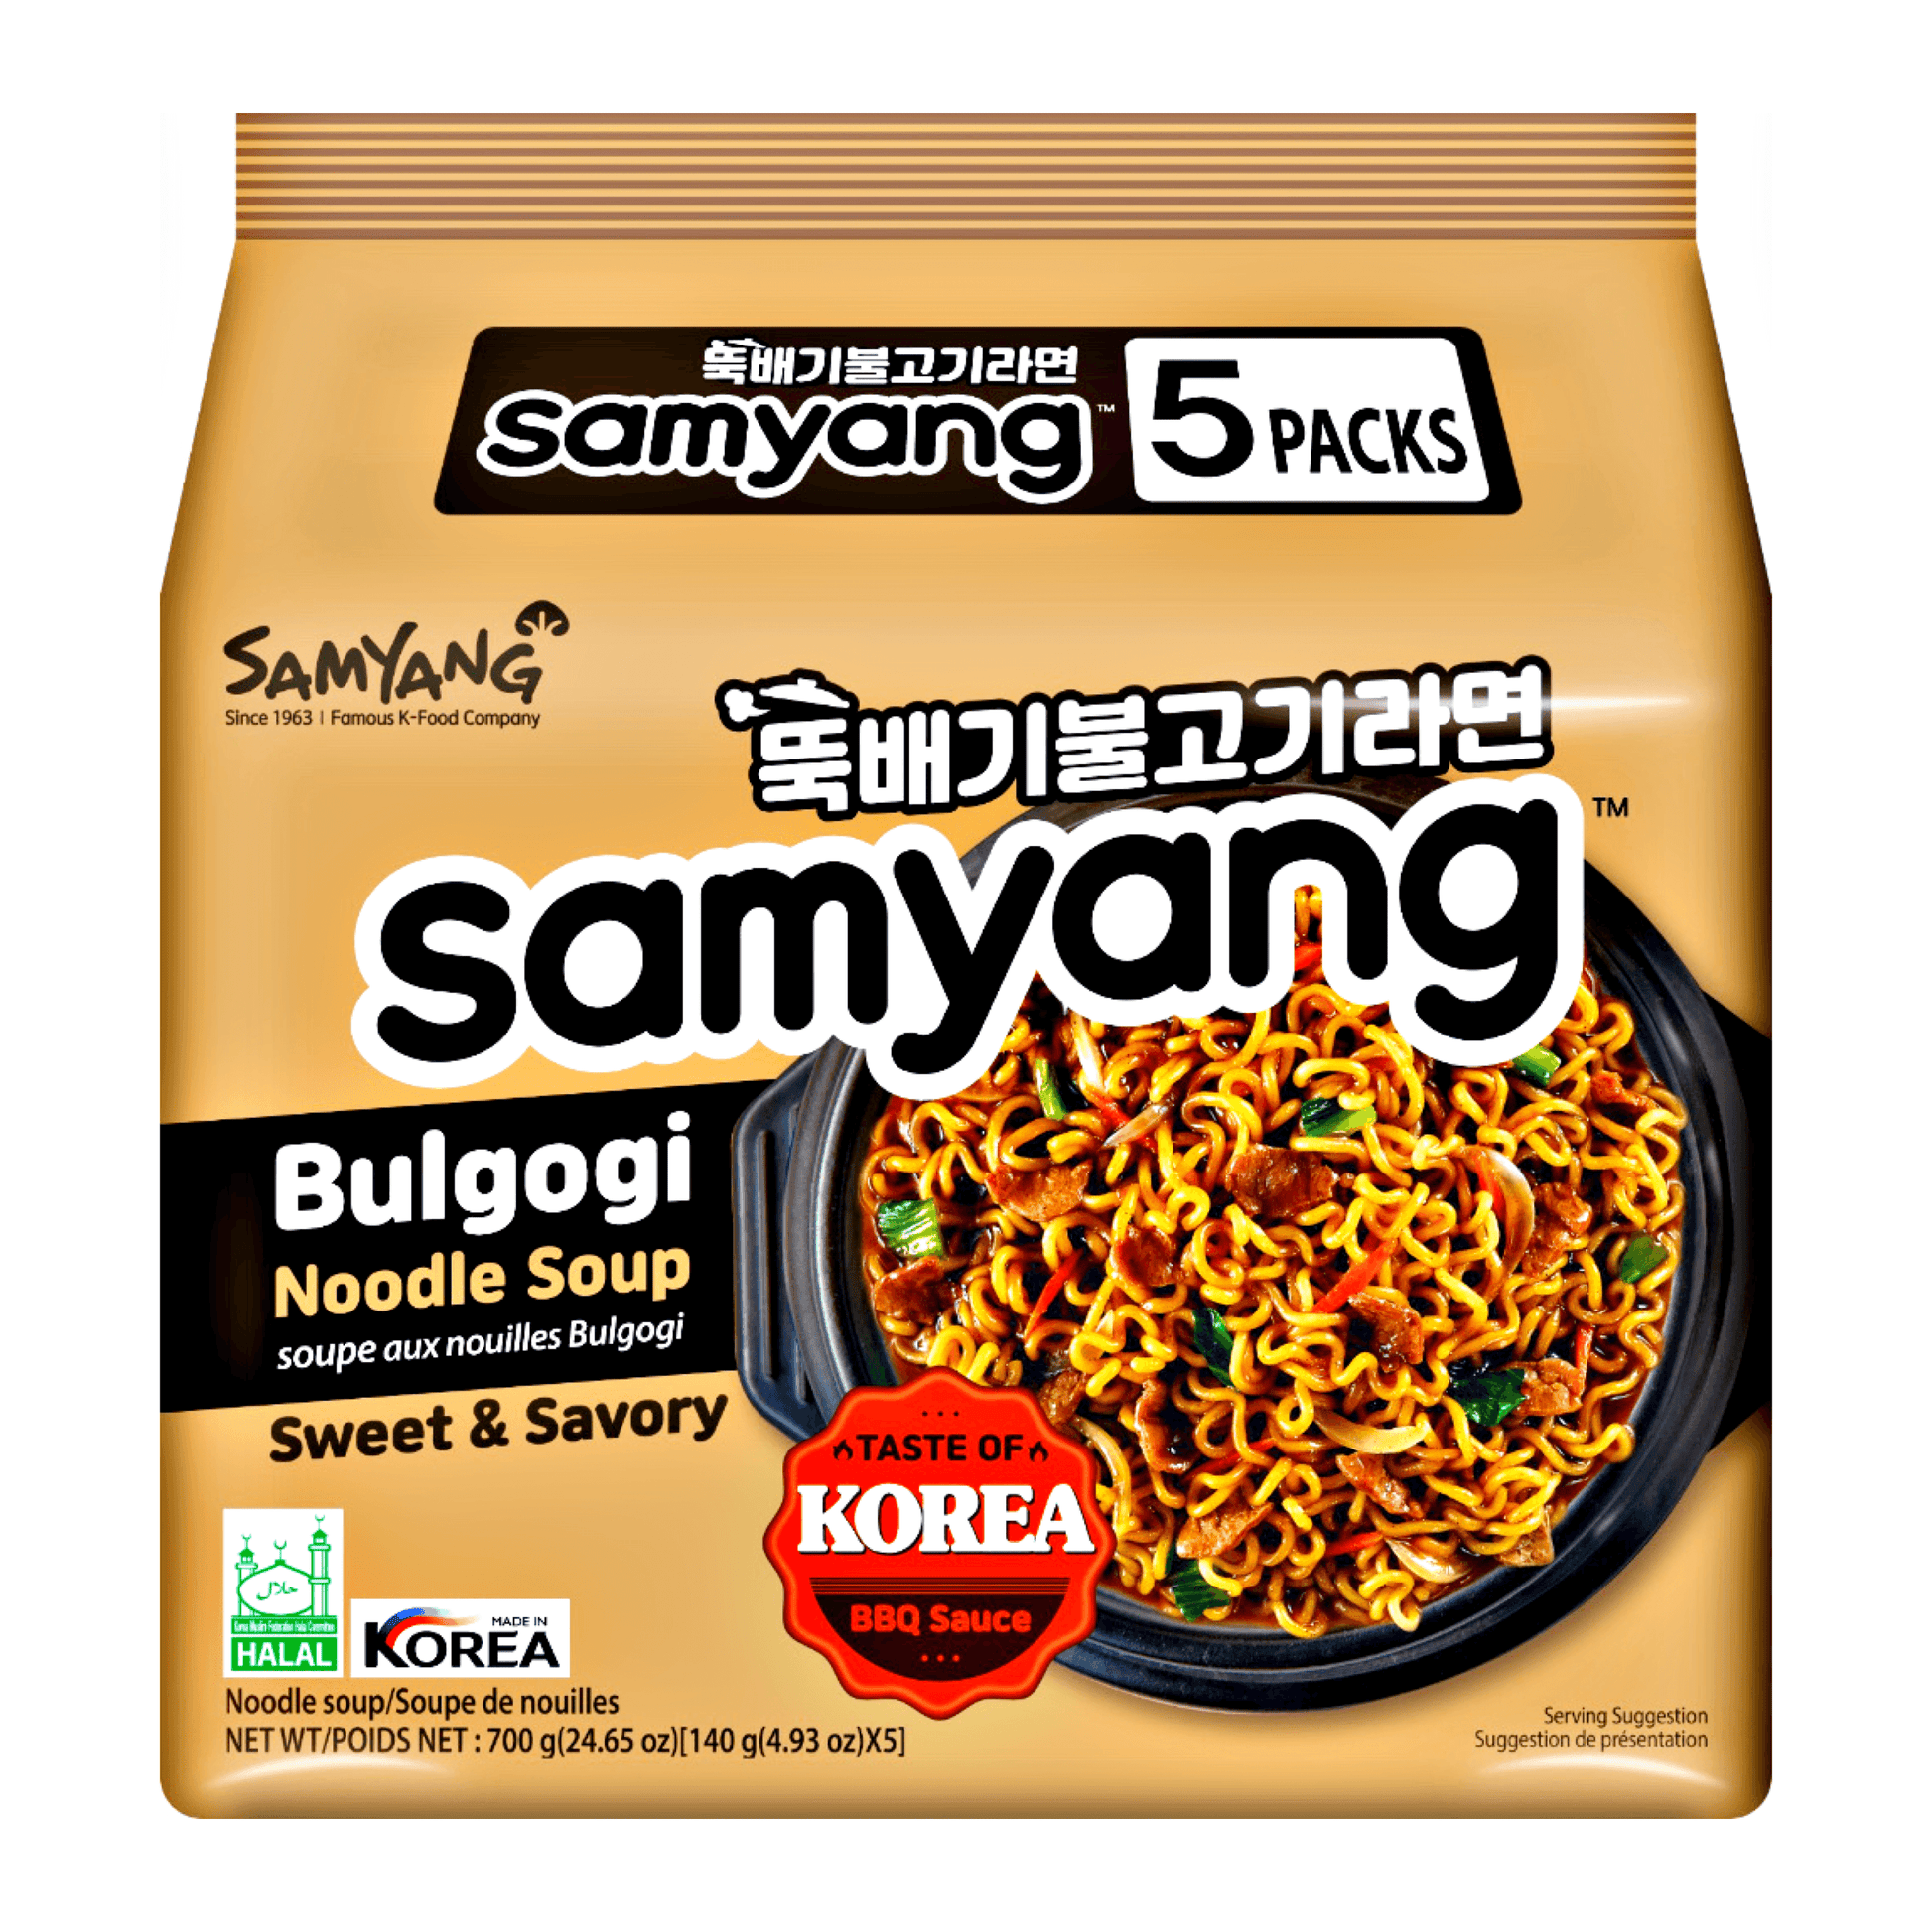 AlluloseㅣBy IngredientsㅣProductㅣSamyang Specialty